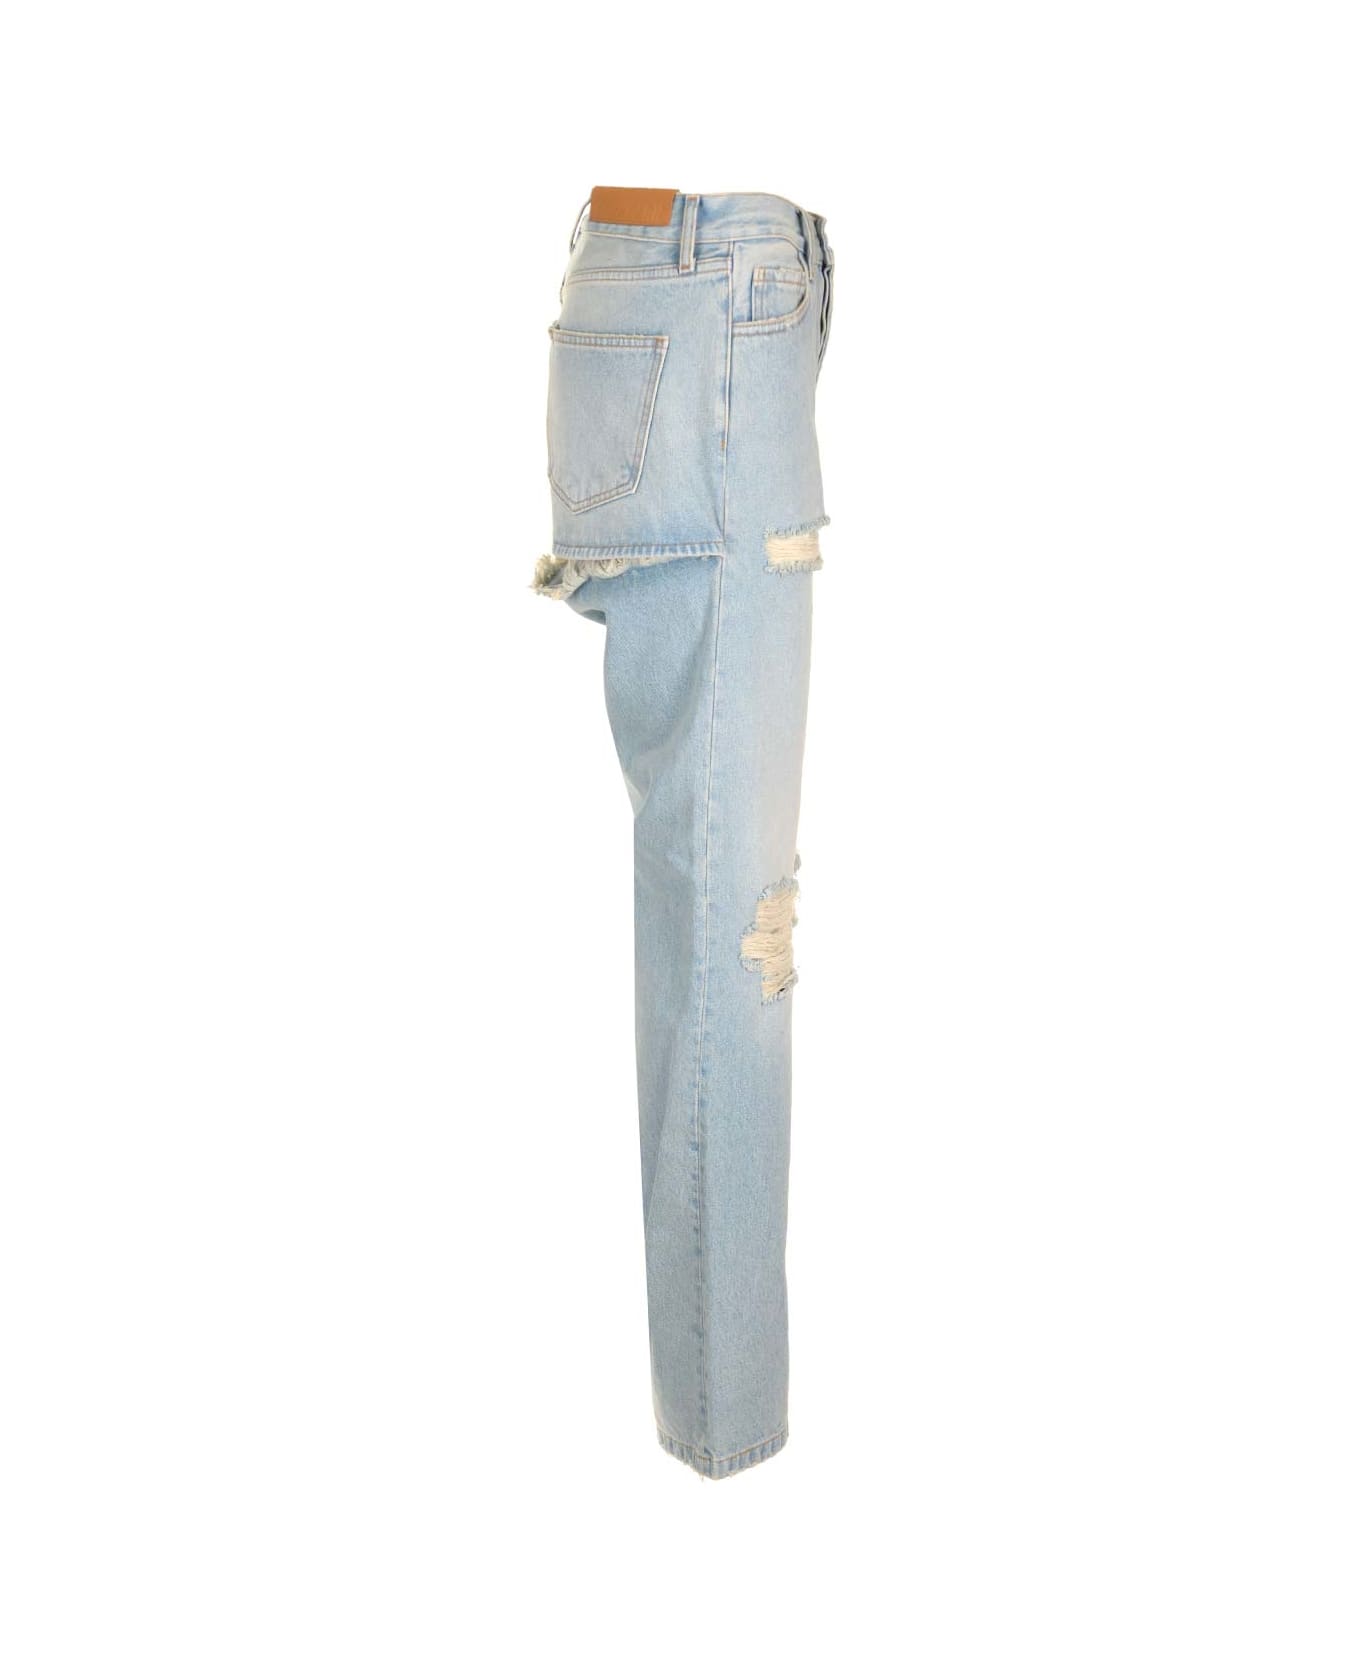 DARKPARK 'naomi' Ripped Jeans - Clear Blue デニム